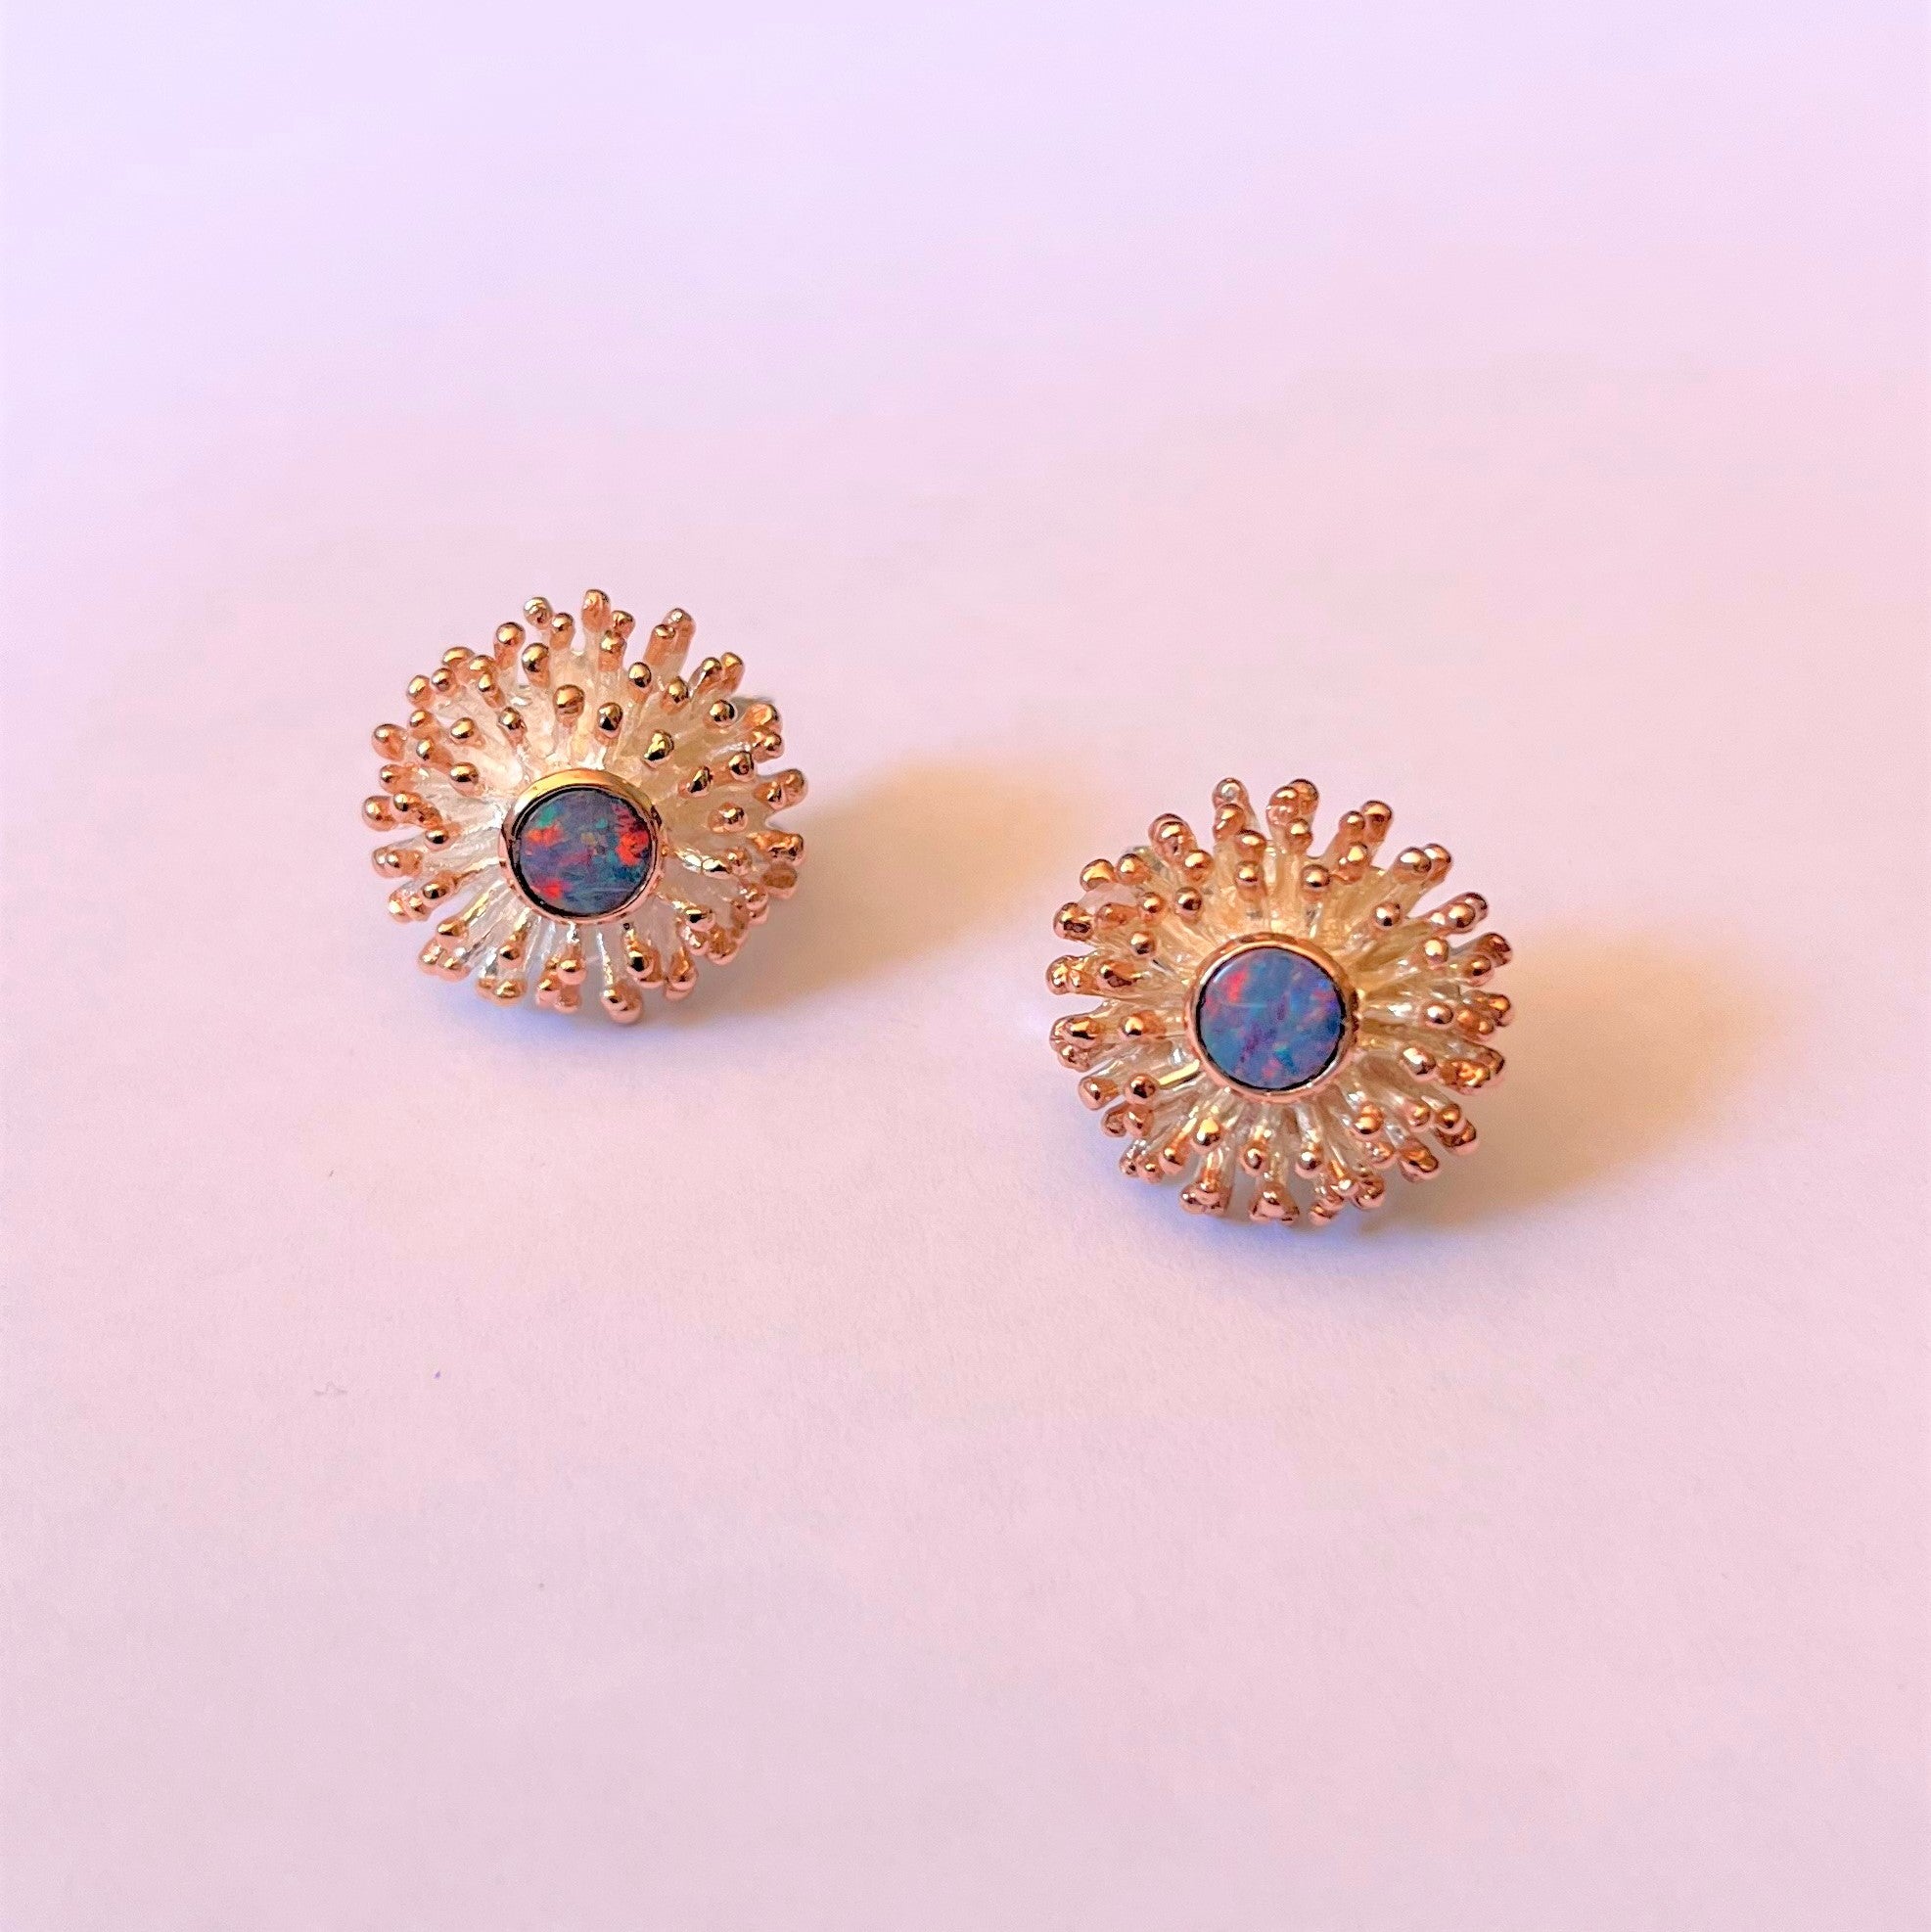 Keiko Uno - 'Anemone' Large Studs with Opal and Rose Gold Accents (kun070)